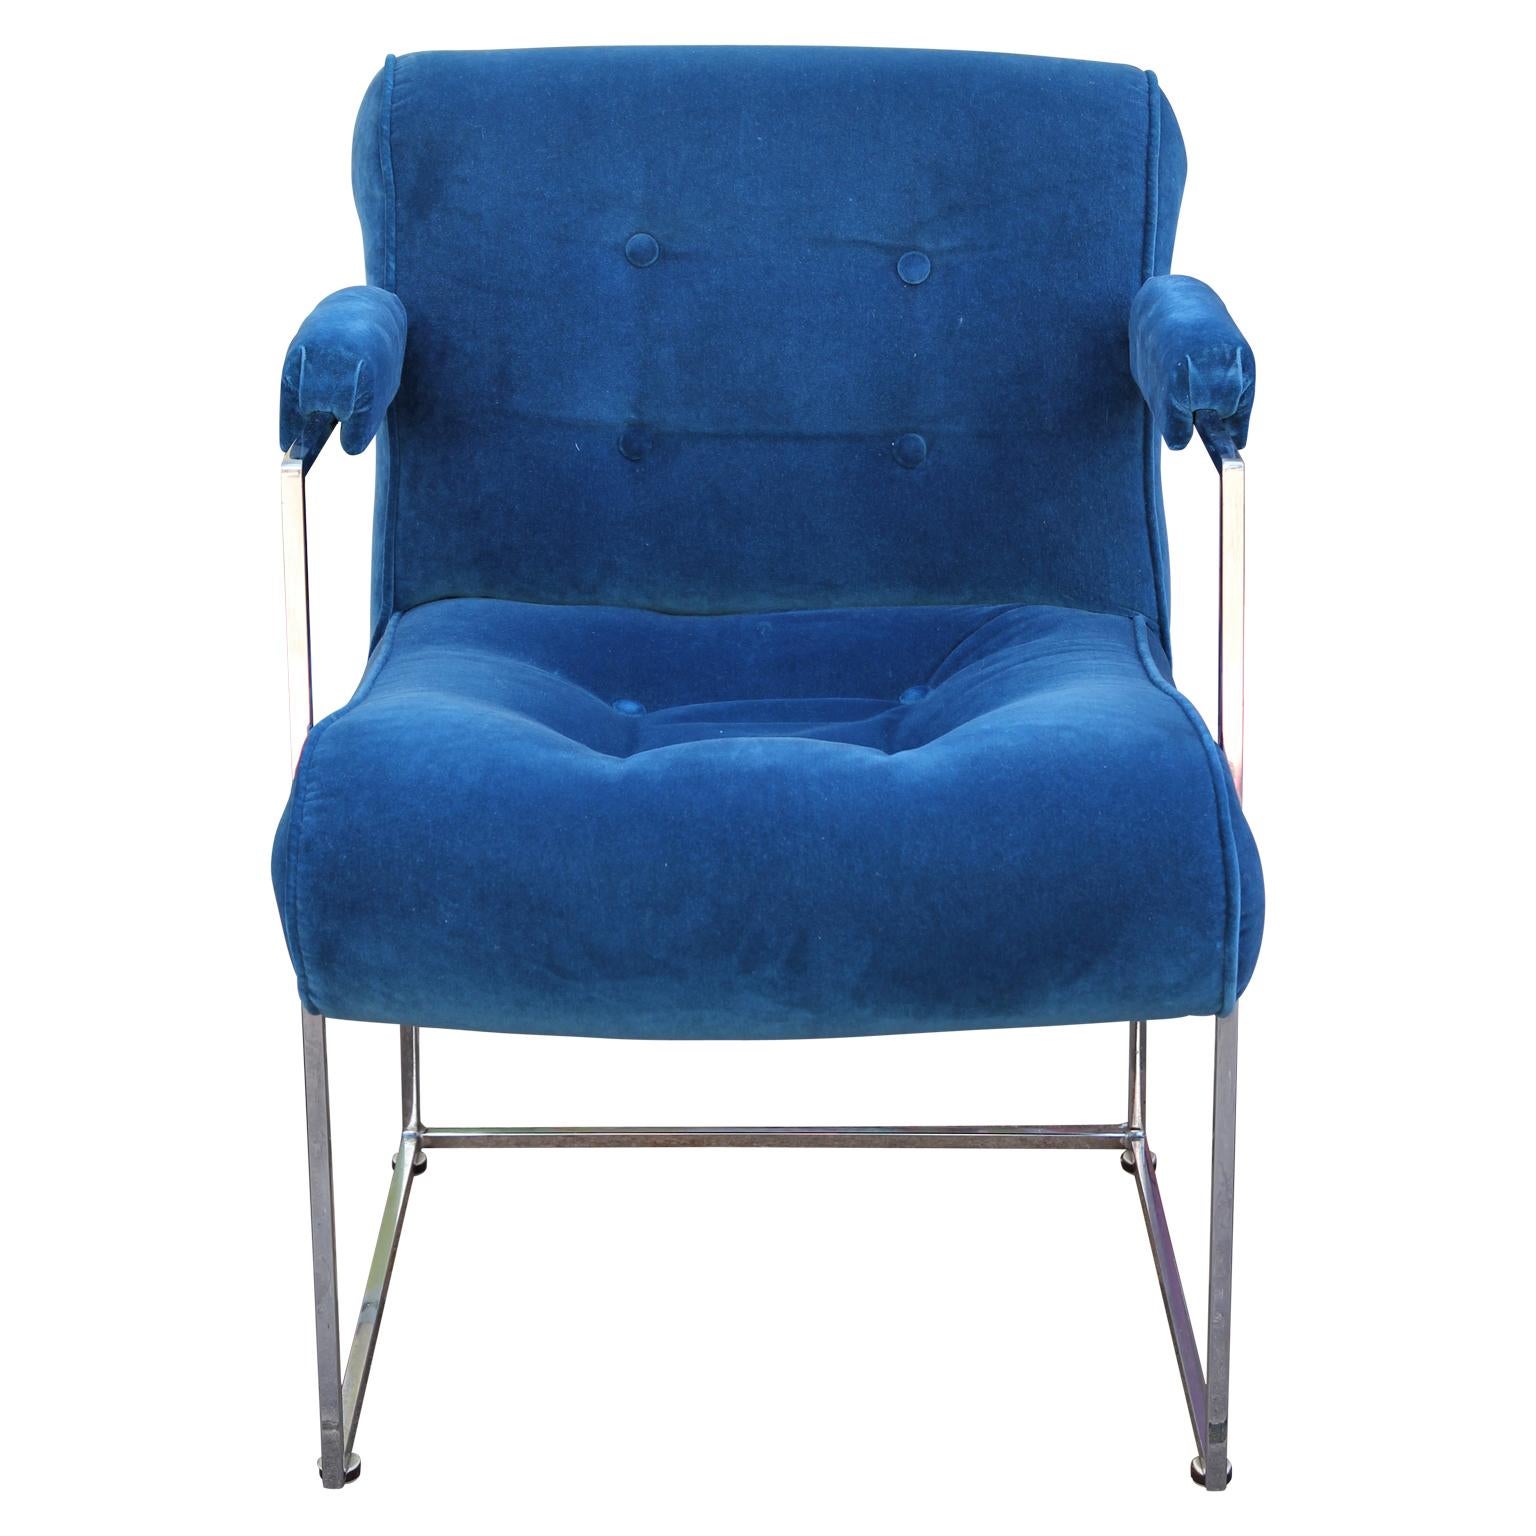 Set of 6 blue velvet and chrome Milo Baughman Thayer Coggin dining chairs
Upholstered around 5 years ago. COM available. For perfection COM recommended.